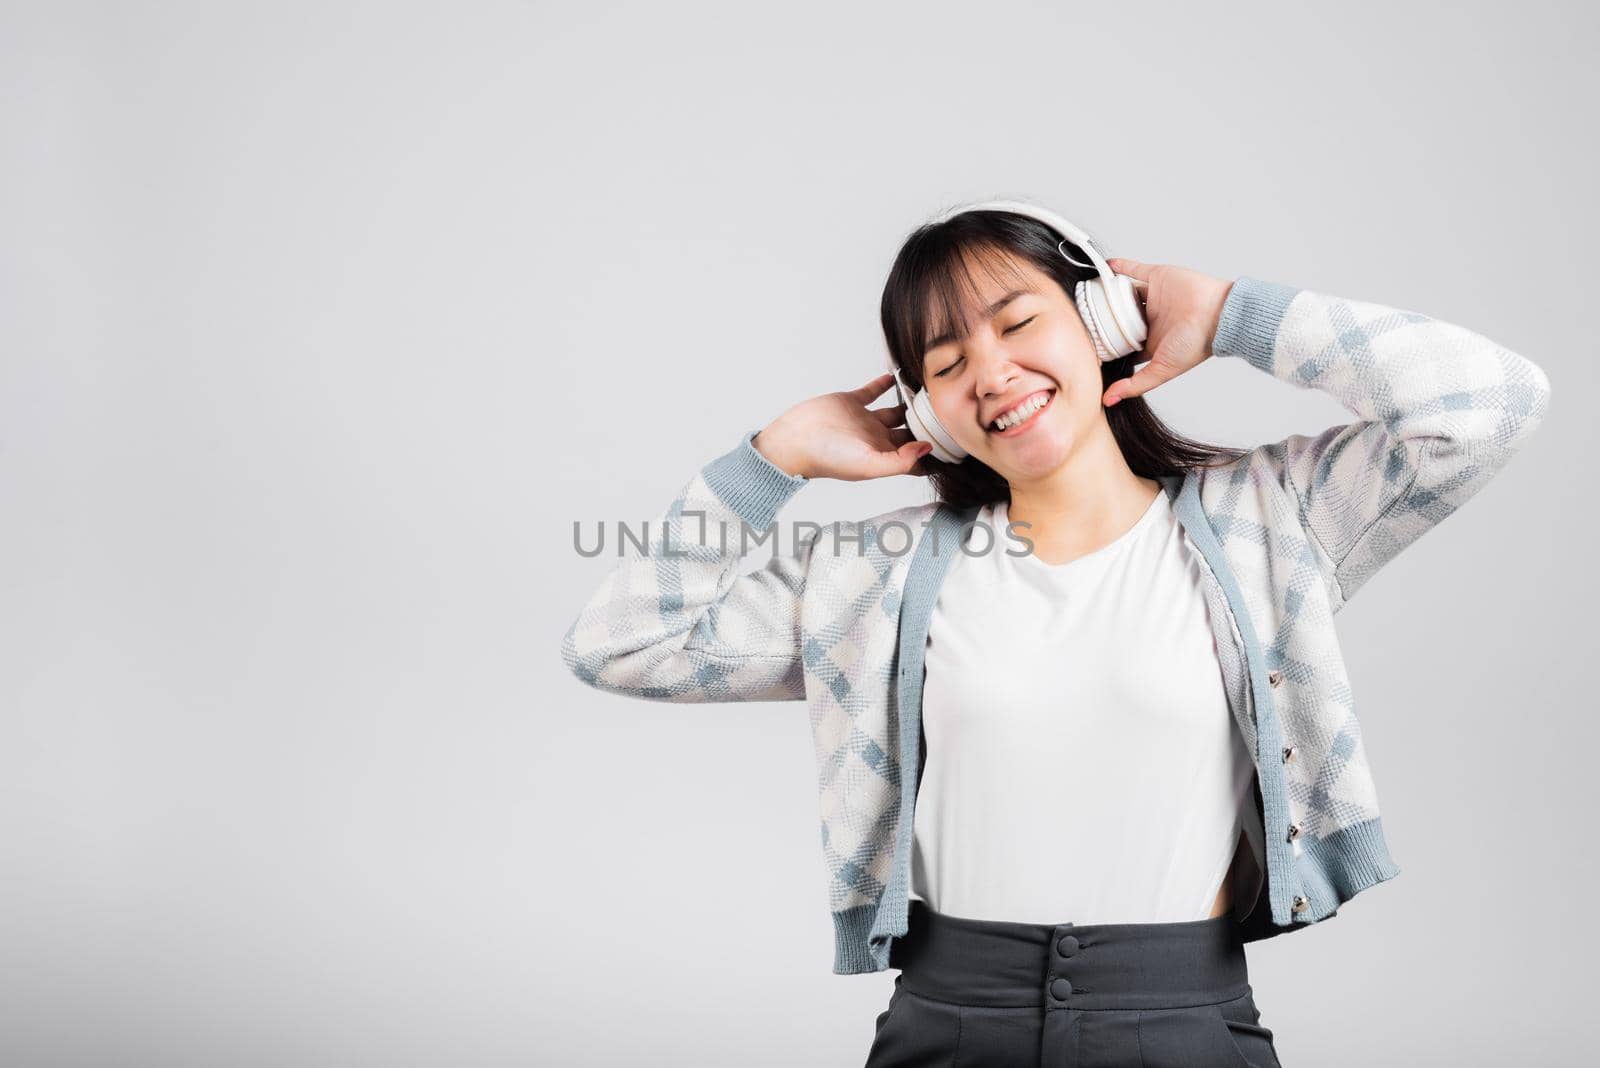 Woman excited smiling listening to music radio in bluetooth headphones and holding phone by Sorapop